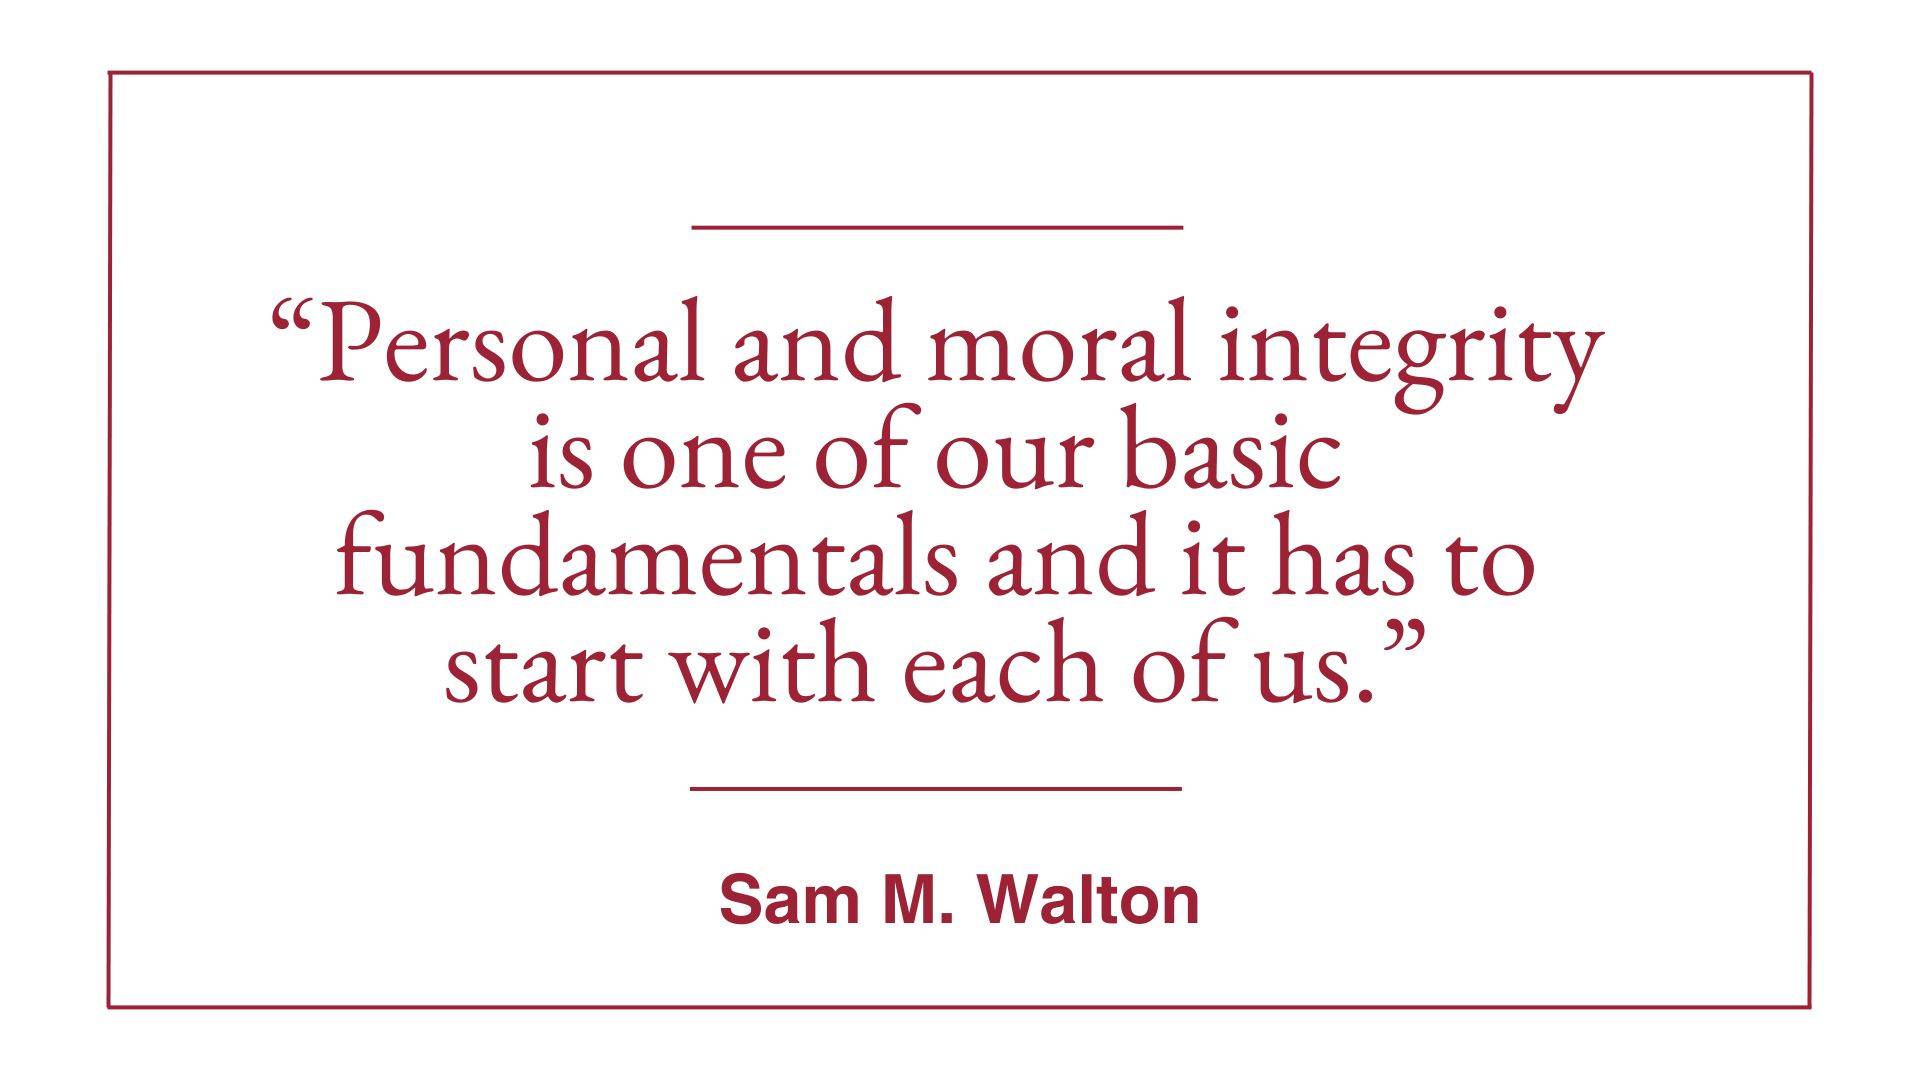 "Personal and moral integrity is one of our basic fundamentals and it has to start with each of us." Sam M. Walton